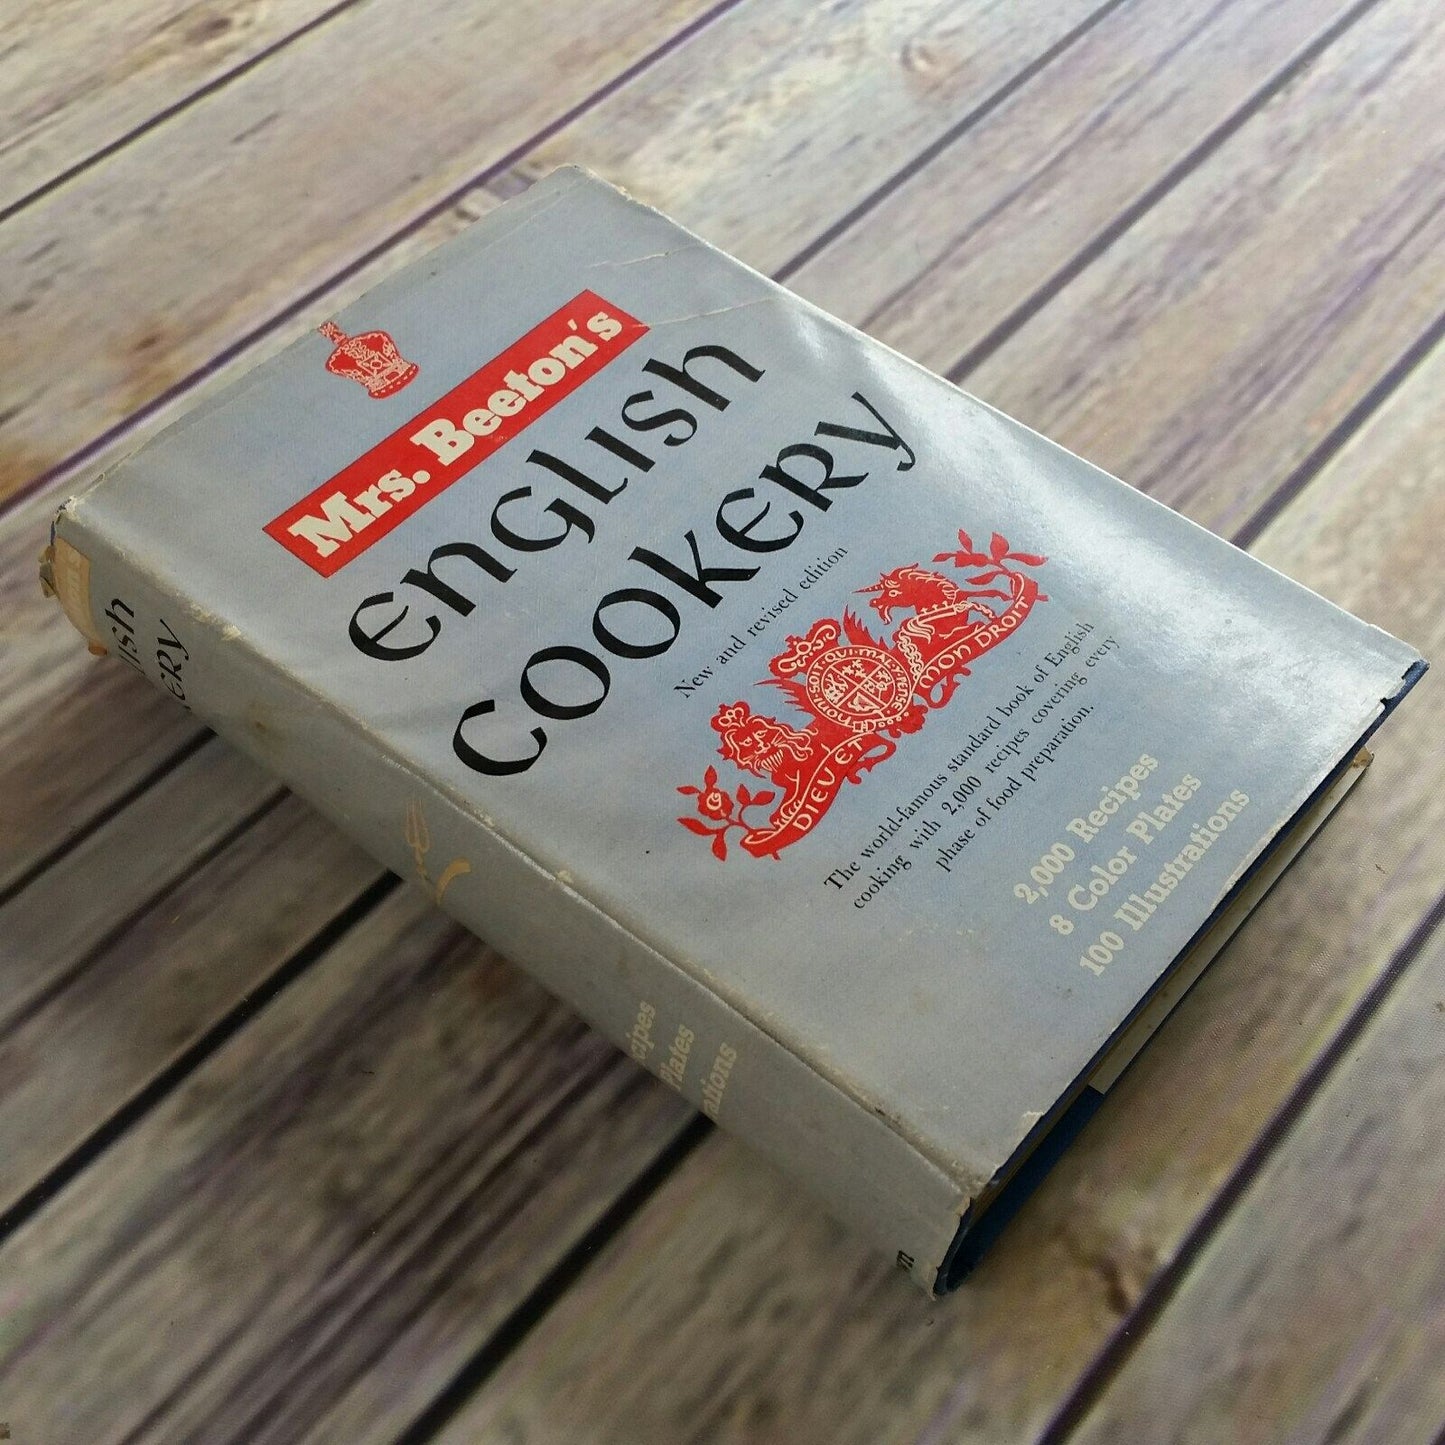 Vintage Cookbook English Cookery Recipes Hardcover with Dust Jacket Mrs. Beeton New and Revised Edition 1940s 1950s 1960s